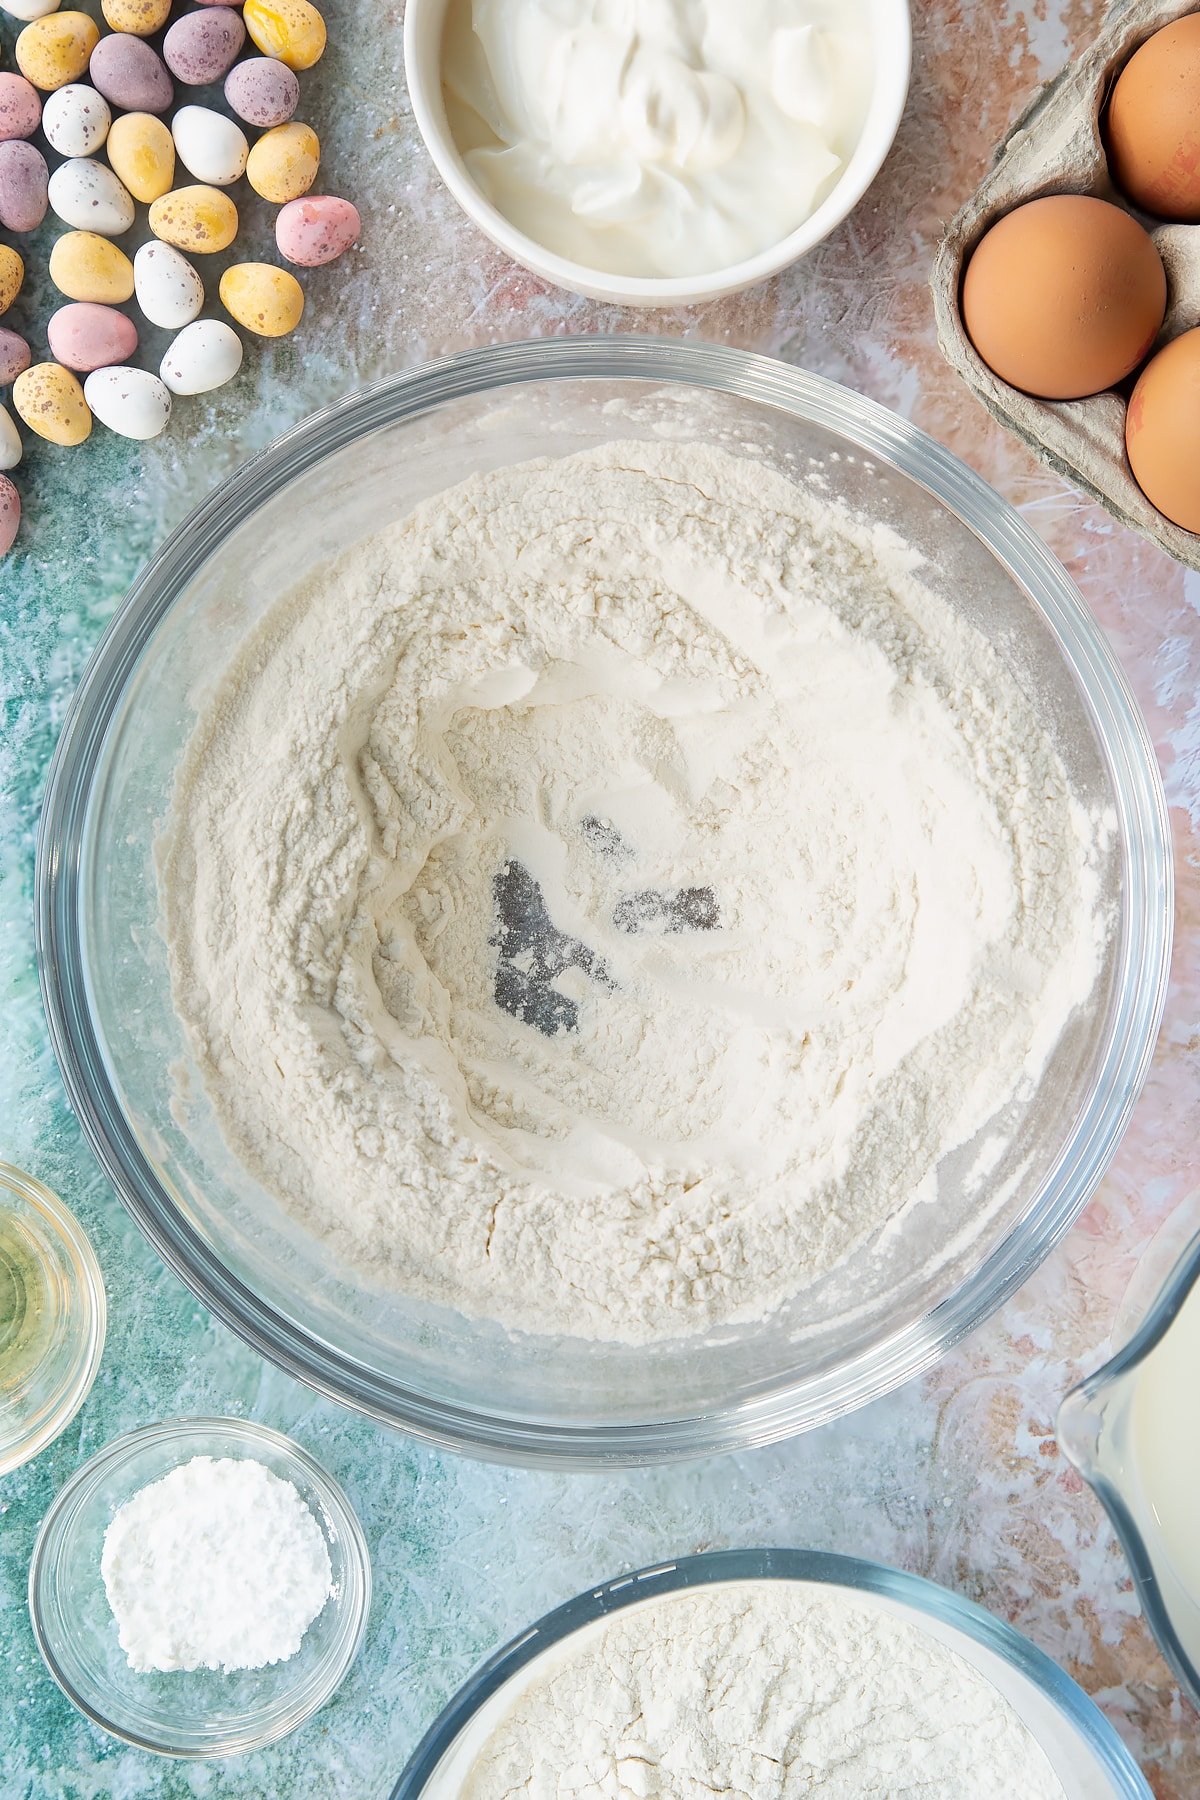 Flour and baking powder in a bowl with a well in the centre. Ingredients to make Mini Egg pancakes surround the bowl.